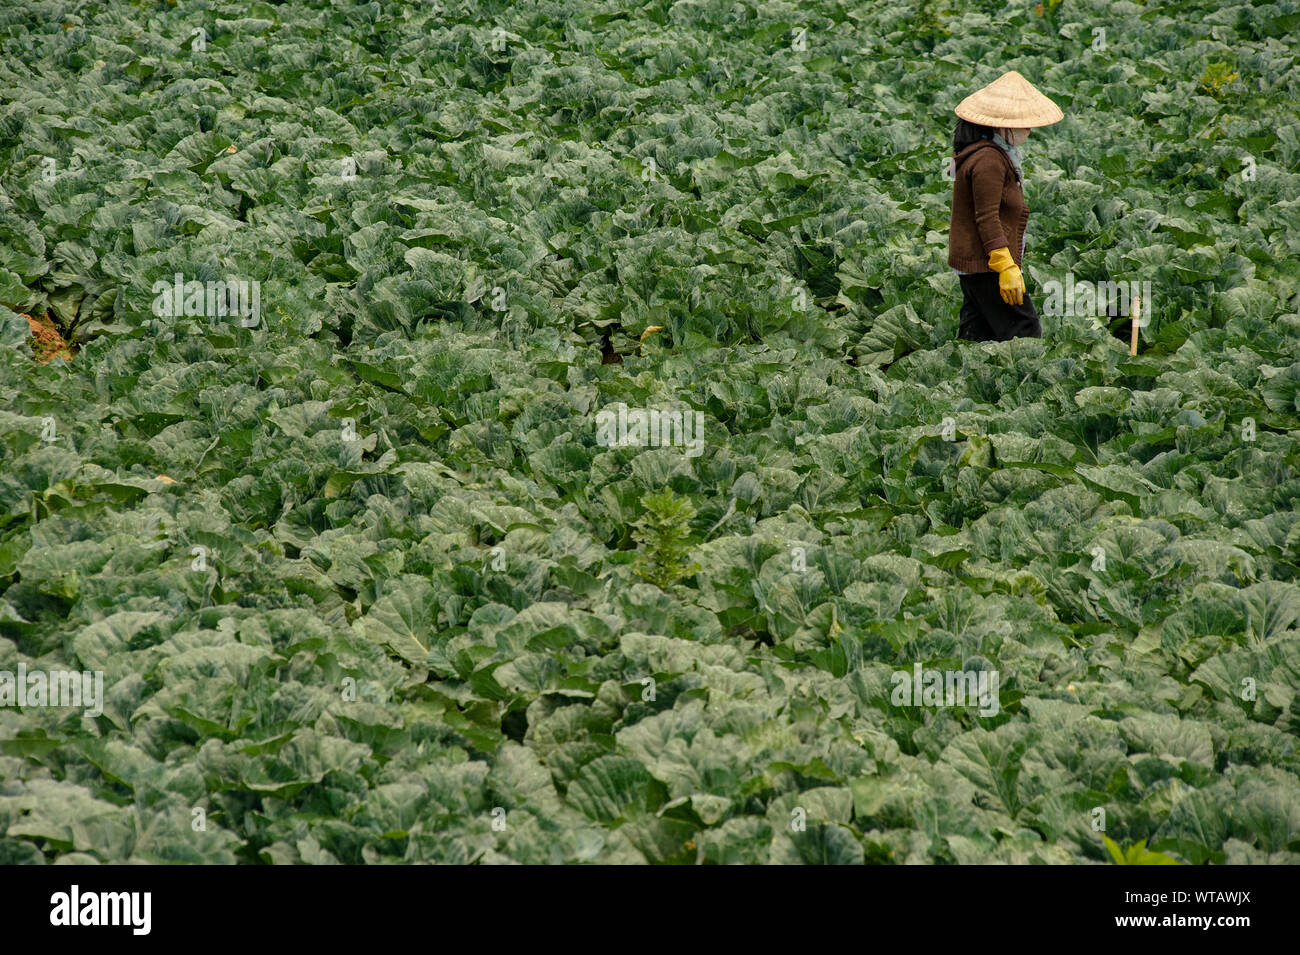 Vietnamese woman in the vegetable plantation Stock Photo